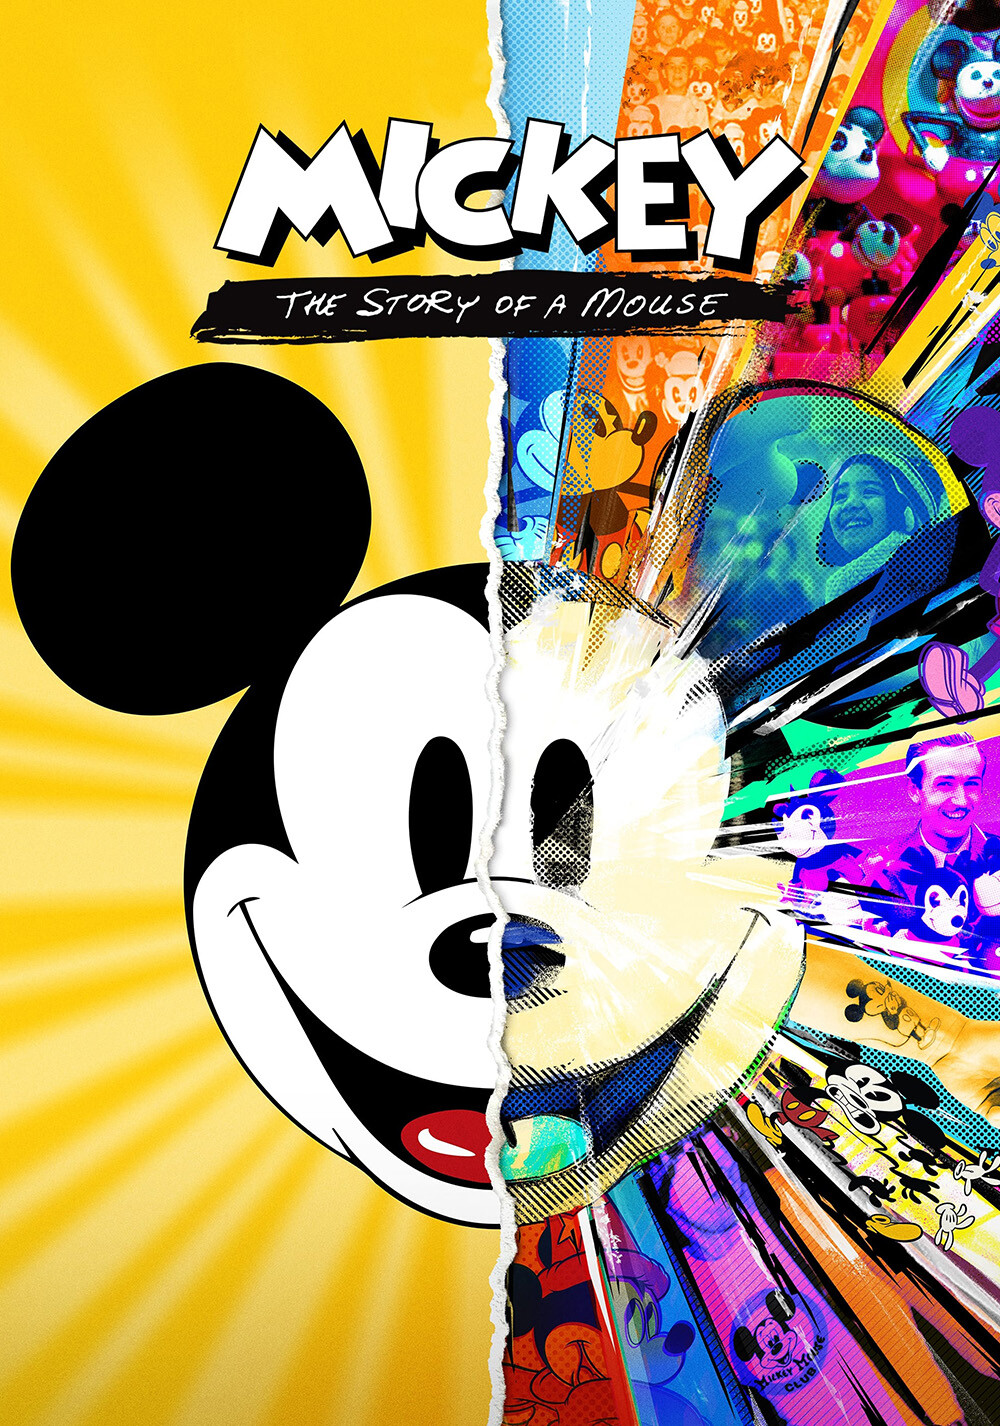 Mickey The Story of a Mouse 2022 1080p Webrip X264 AAC-AOC